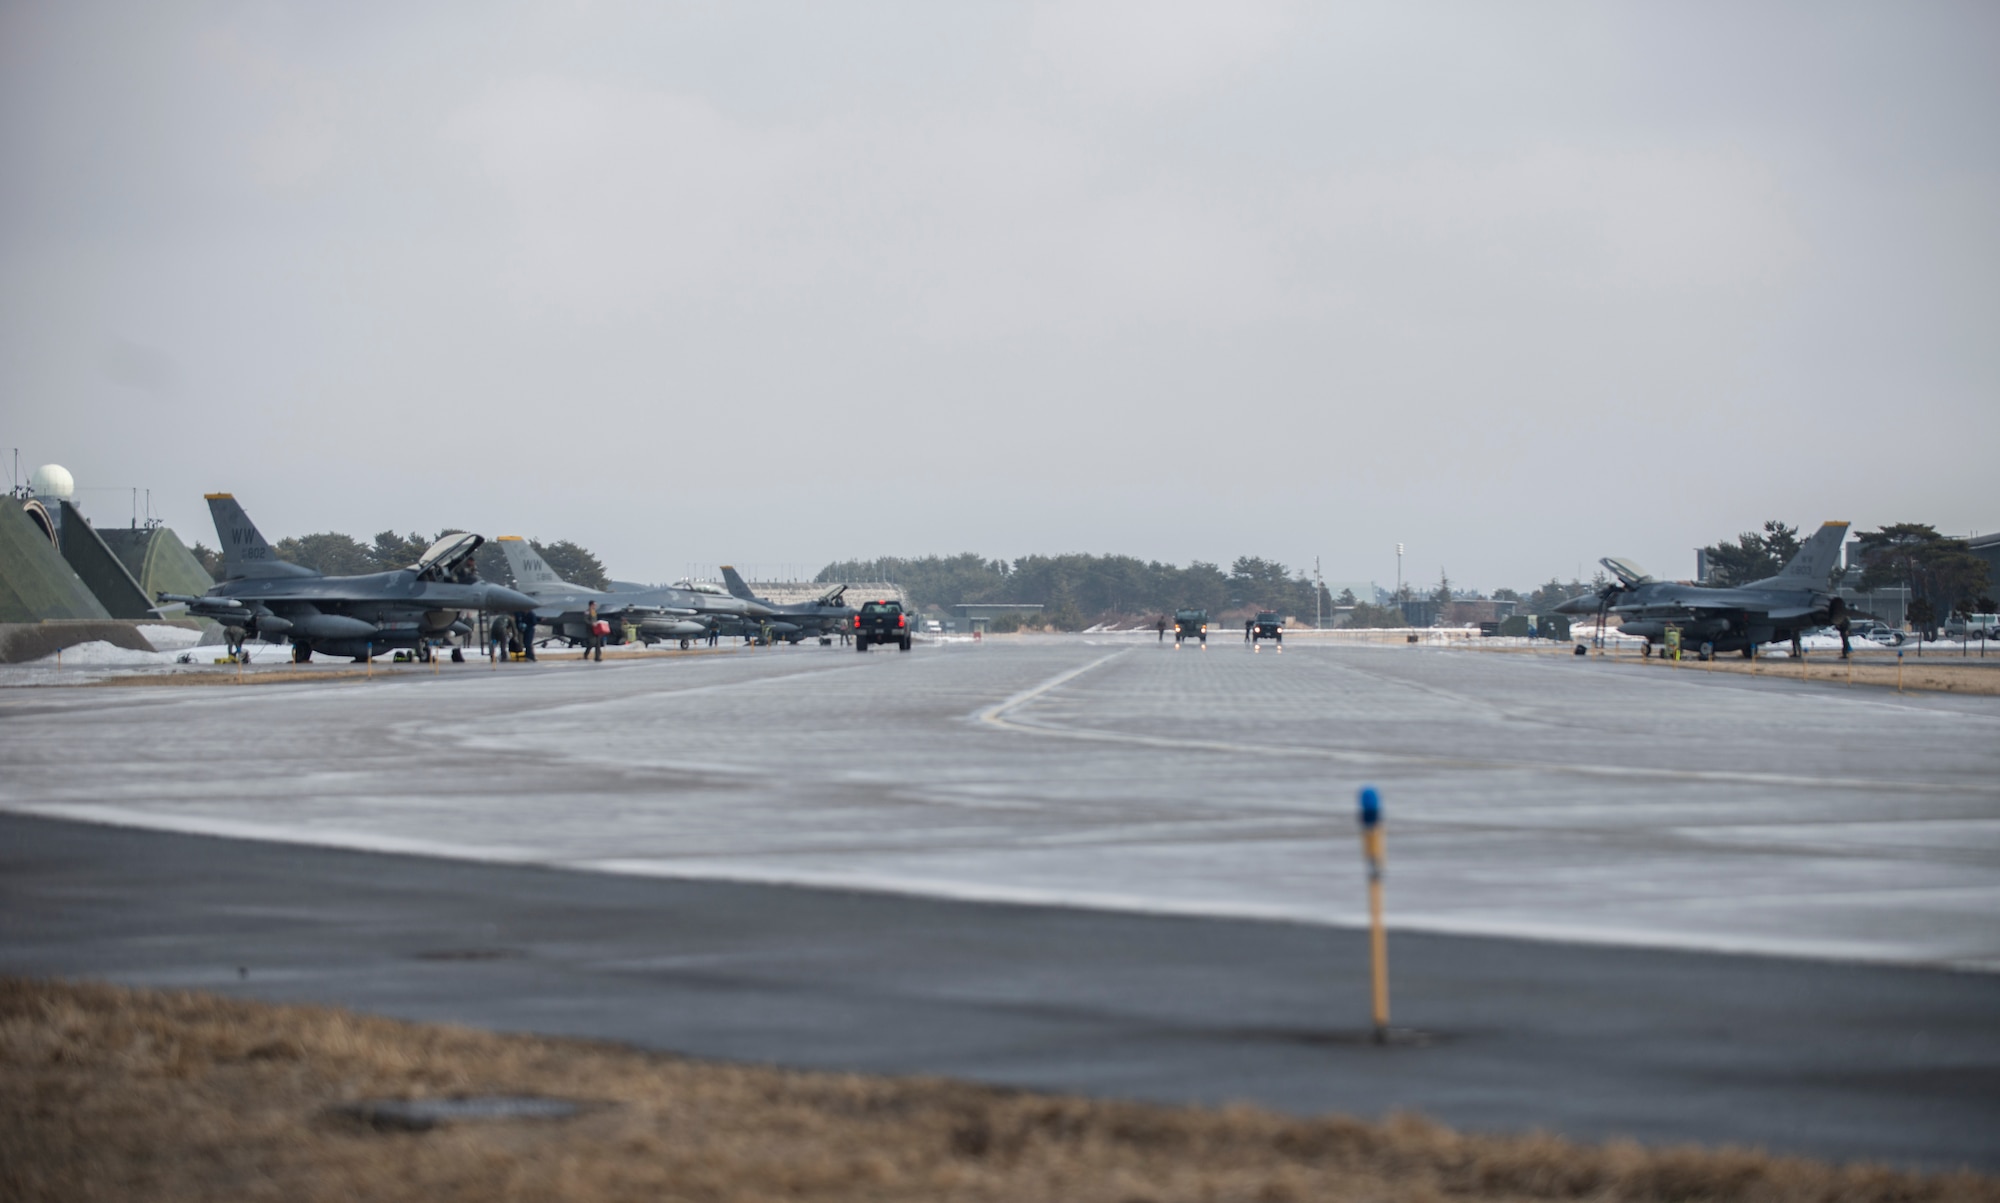 F-16 Fighting Falcons are parked on the flightline at Misawa Air Base, Japan, March 4, 2017. The 14th Fighter Squadron returned from COPE NORTH 17 which is a long-standing exercise, originating here in 1978, designed to enhance multilateral air operations between the U.S. Air Force, U.S. Navy, Japan Air Self-Defense Force and Royal Australian Air Force. (U.S. Air Force photo by Senior Airman Brittany A. Chase)